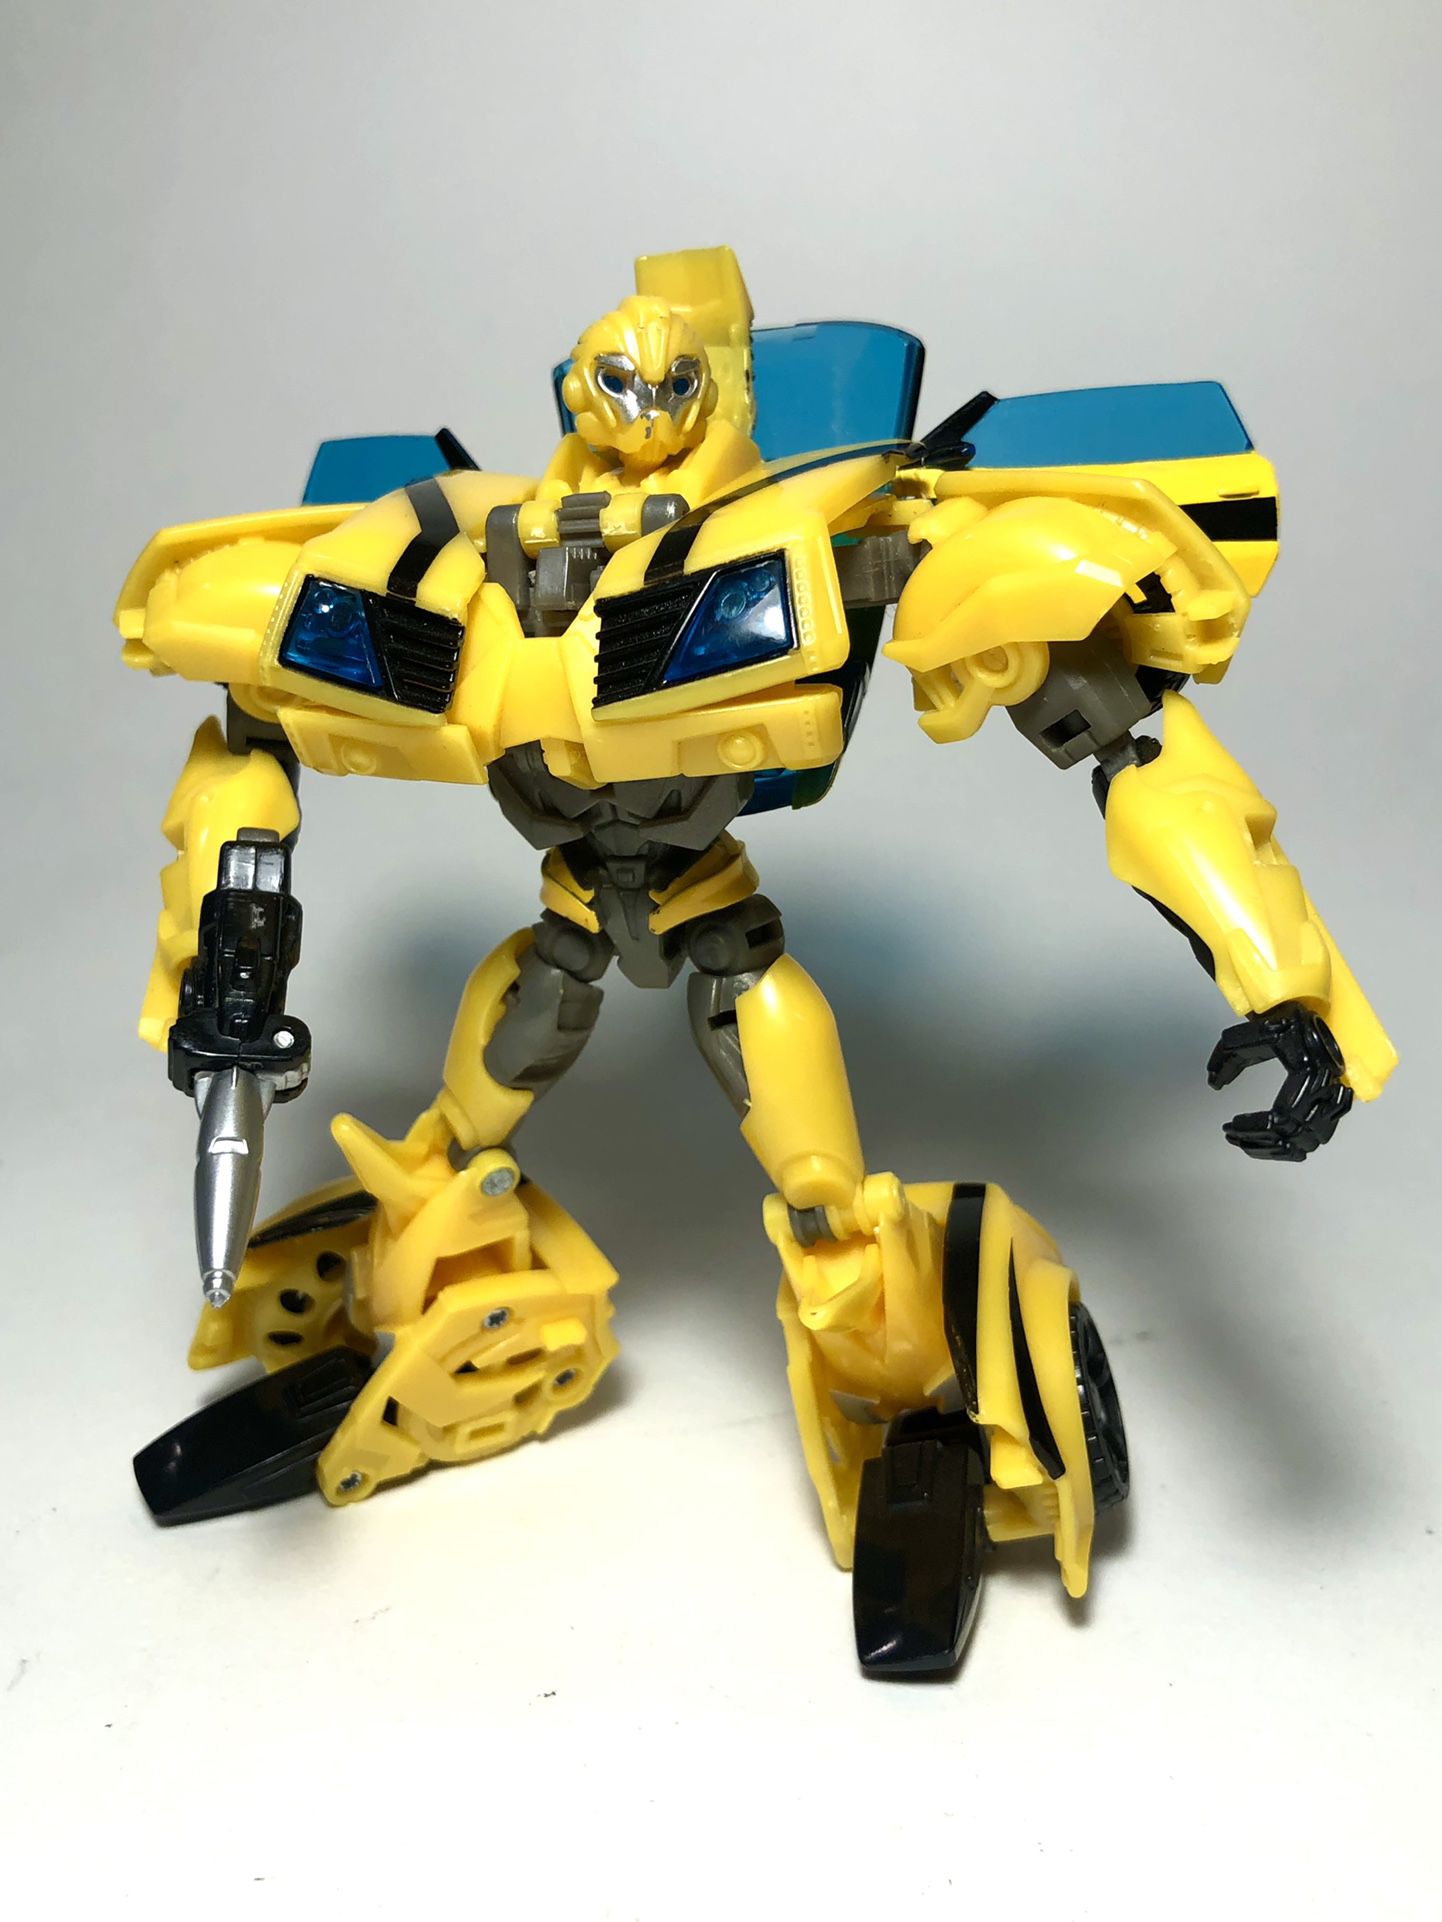 Transformers Prime 1st Ed Deluxe Bumblebee (c)2011 <RARE>